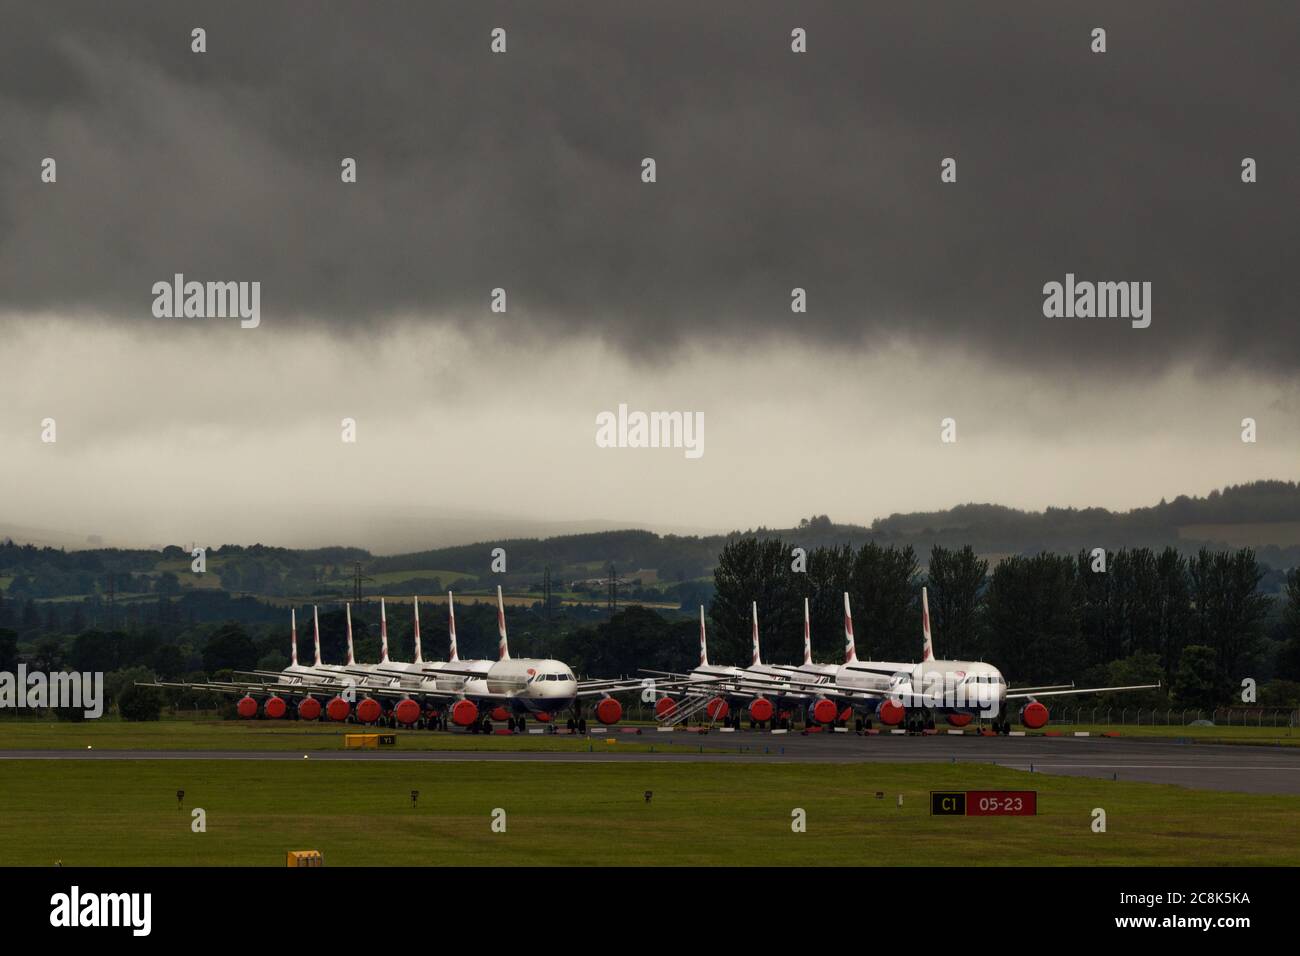 Glasgow, Scotland, UK. 23 July 2020. Pictured: Under a threatening dark stormy cloud, grounded British Airways (BA) Airbus A319/A320/A321 aircraft sit the second runway of Glasgow Airport awaiting their fate of being sold off or put in storage.  Since March these planes have been sitting idle on the the airports tarmac, doe to the global coronavirus (COVID19) crisis.  British Airways have cut almost 12,000 staff, and to date have retired their whole Boeing 747 fleet in a bid to cut operating costs. Credit: Colin Fisher/Alamy Live News. Stock Photo